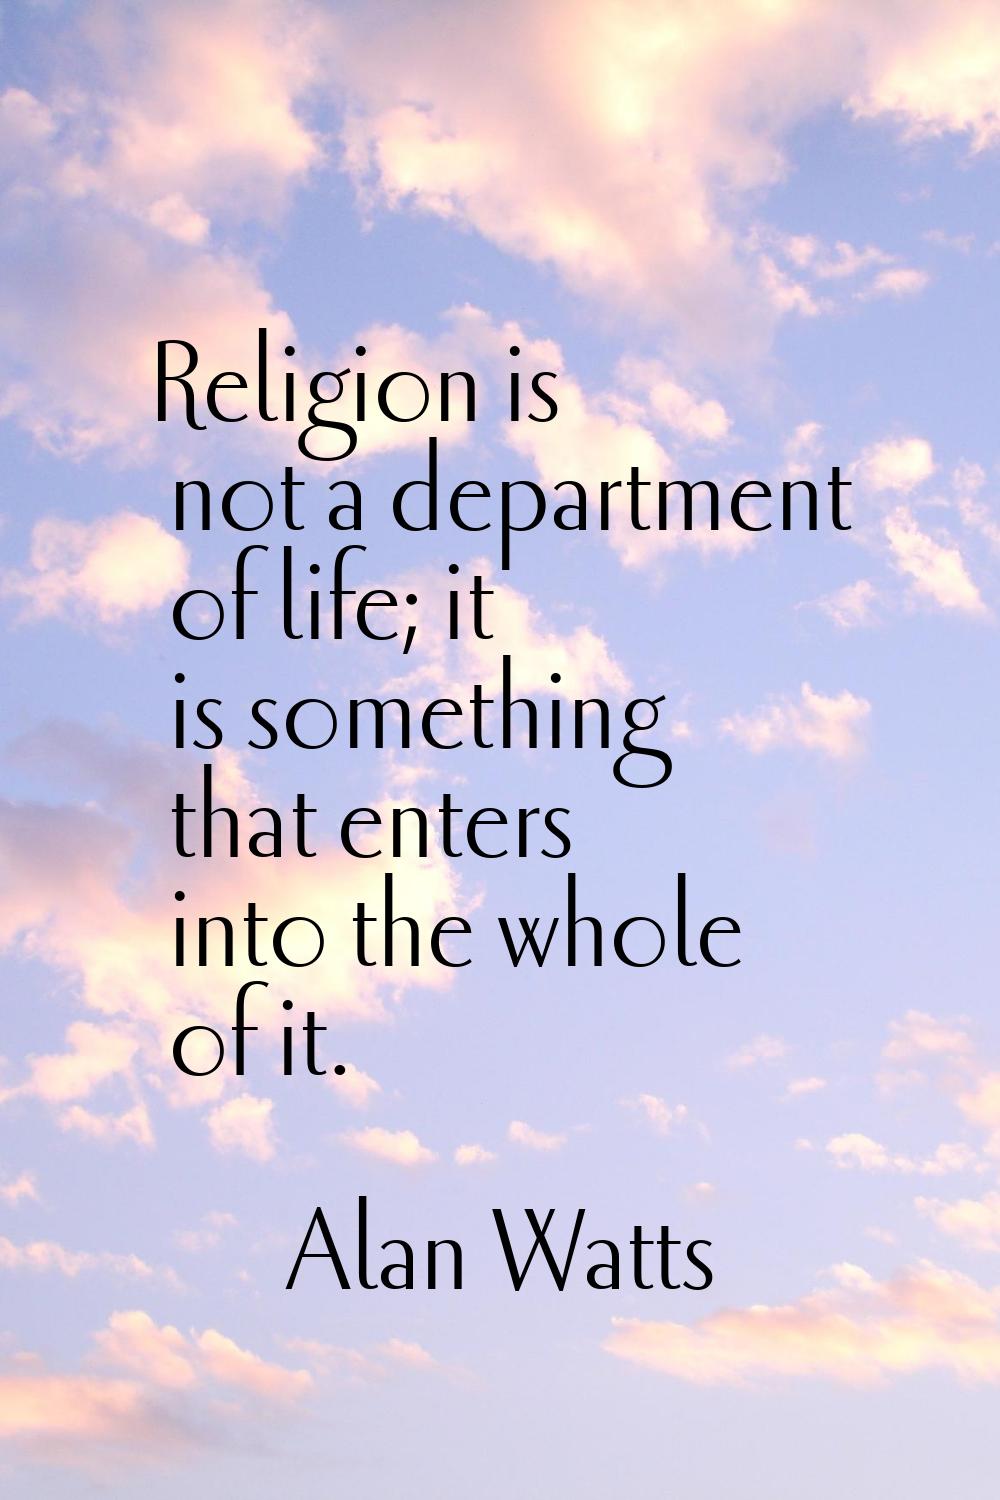 Religion is not a department of life; it is something that enters into the whole of it.